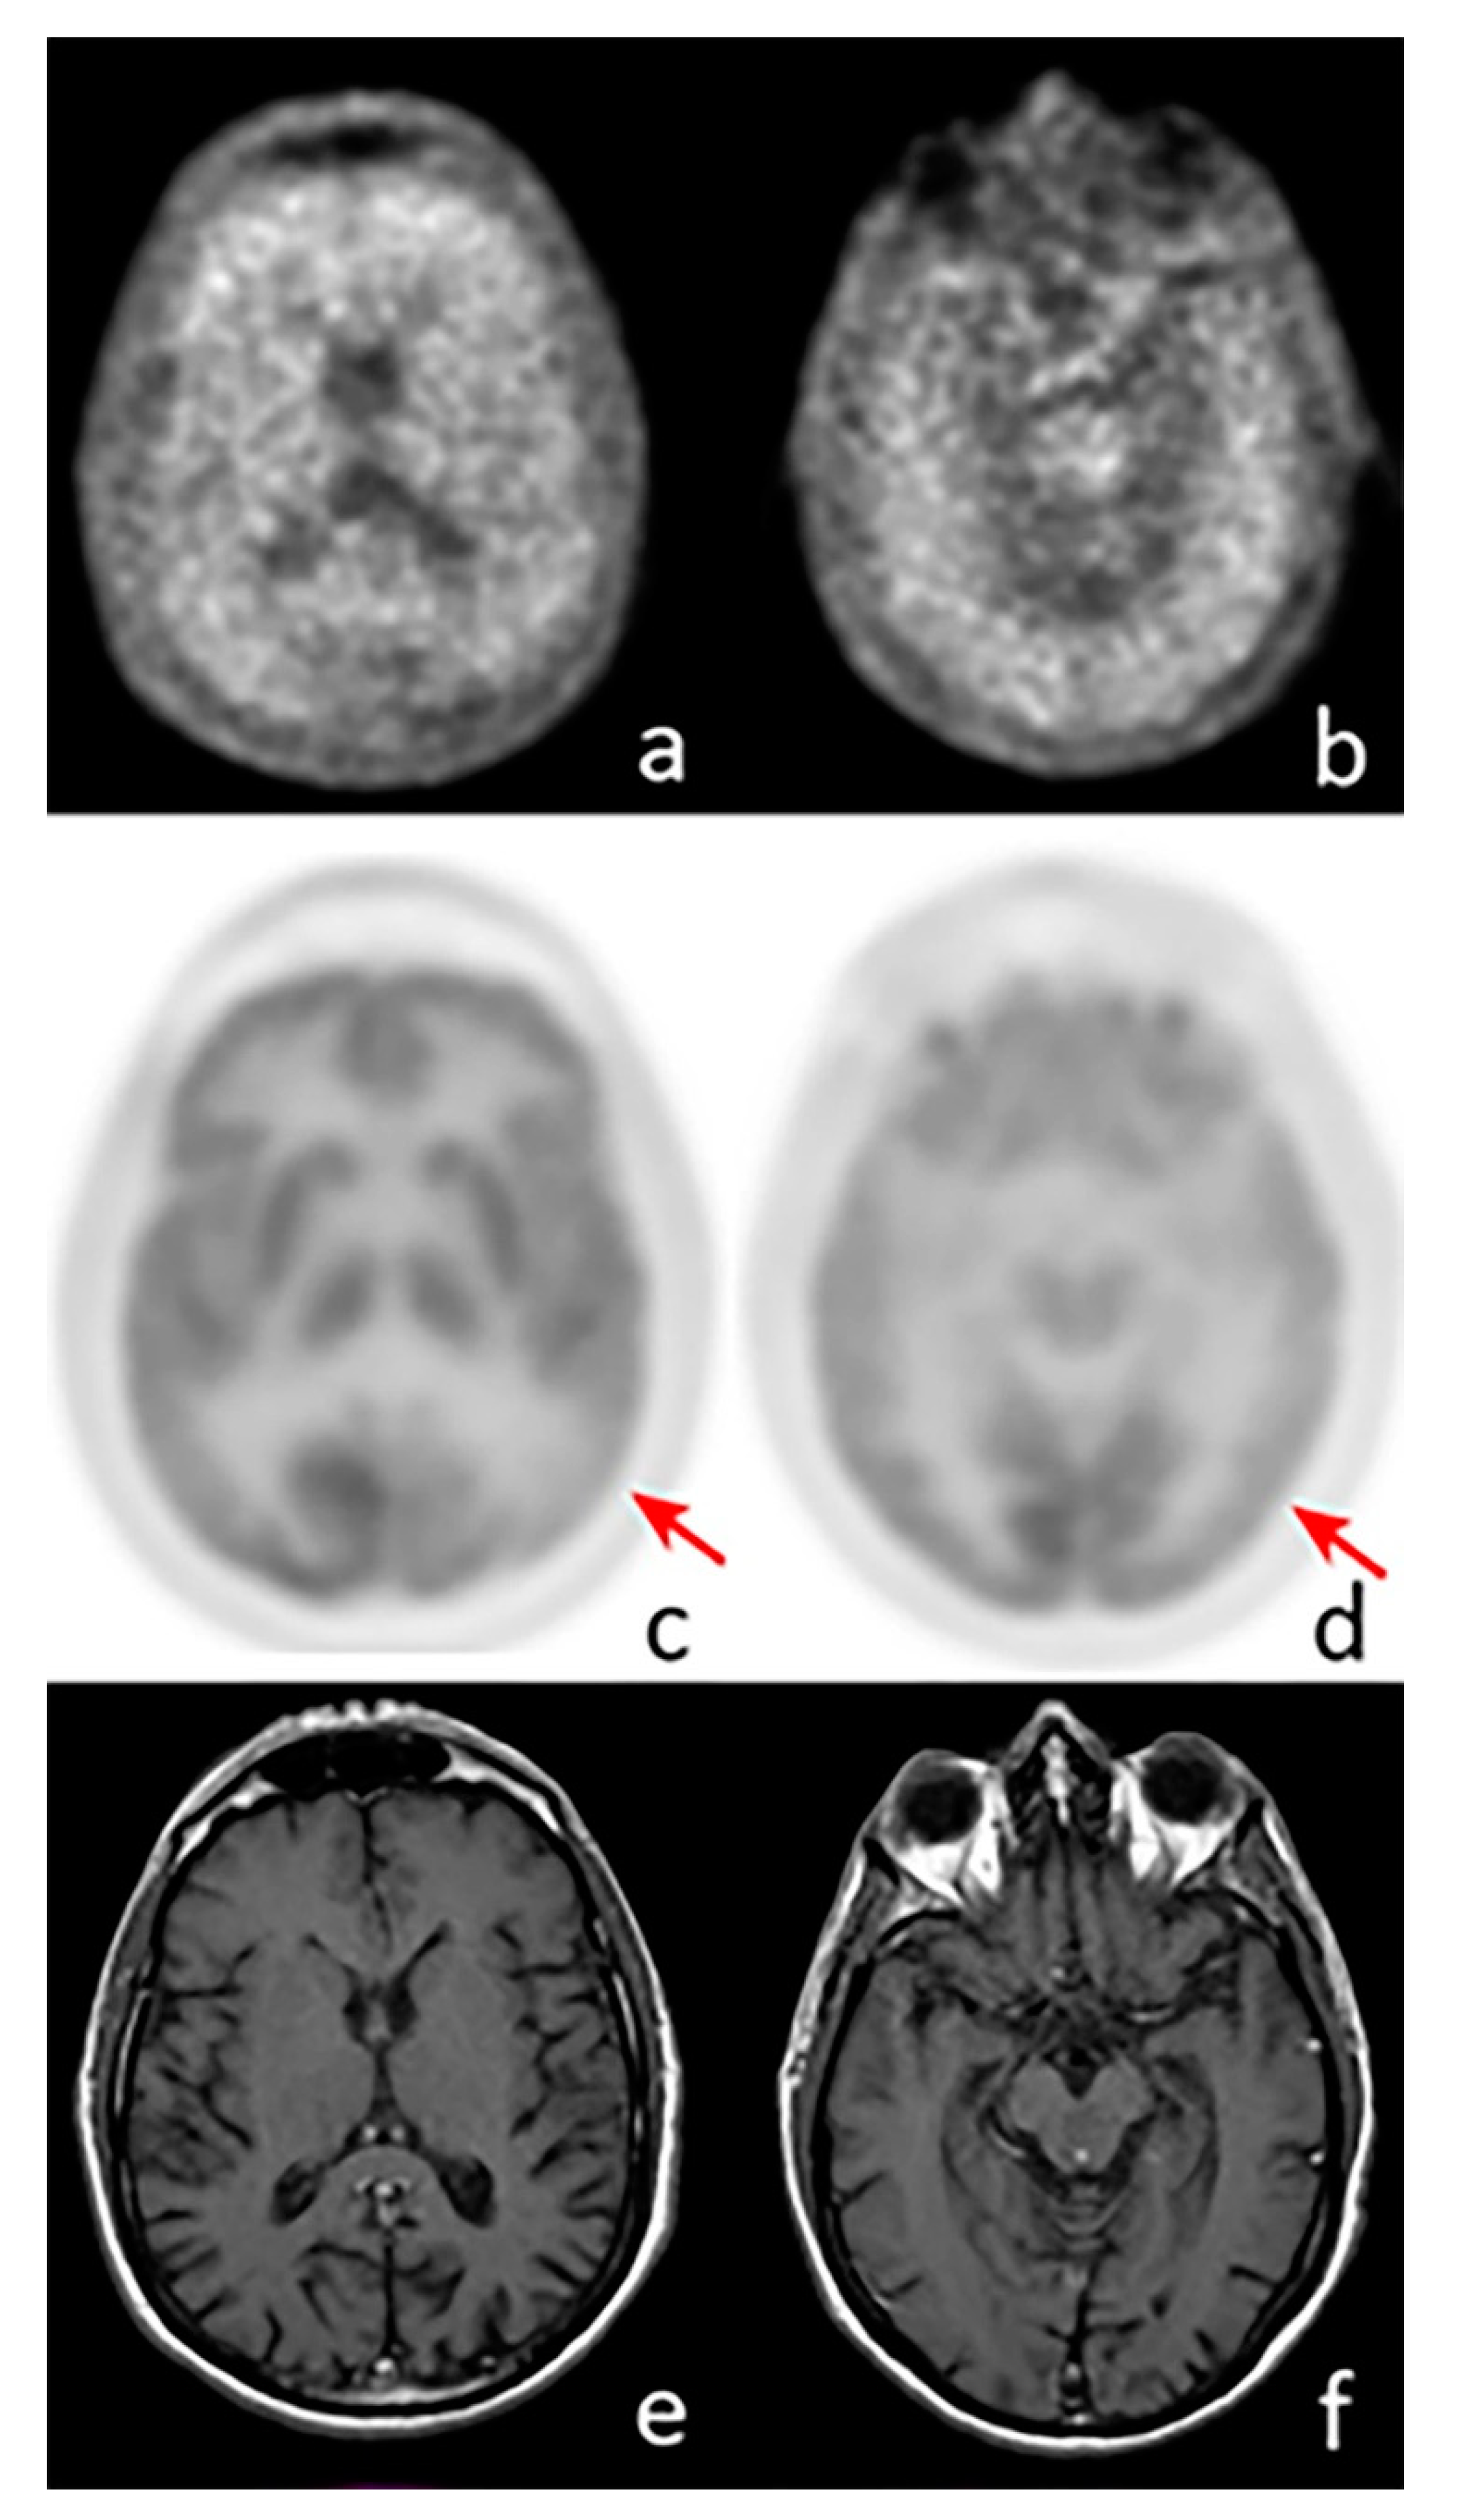 IJMS | Free Full-Text | Positron Emission Tomography (PET) and Neuroimaging  in the Personalized Approach to Neurodegenerative Causes of Dementia